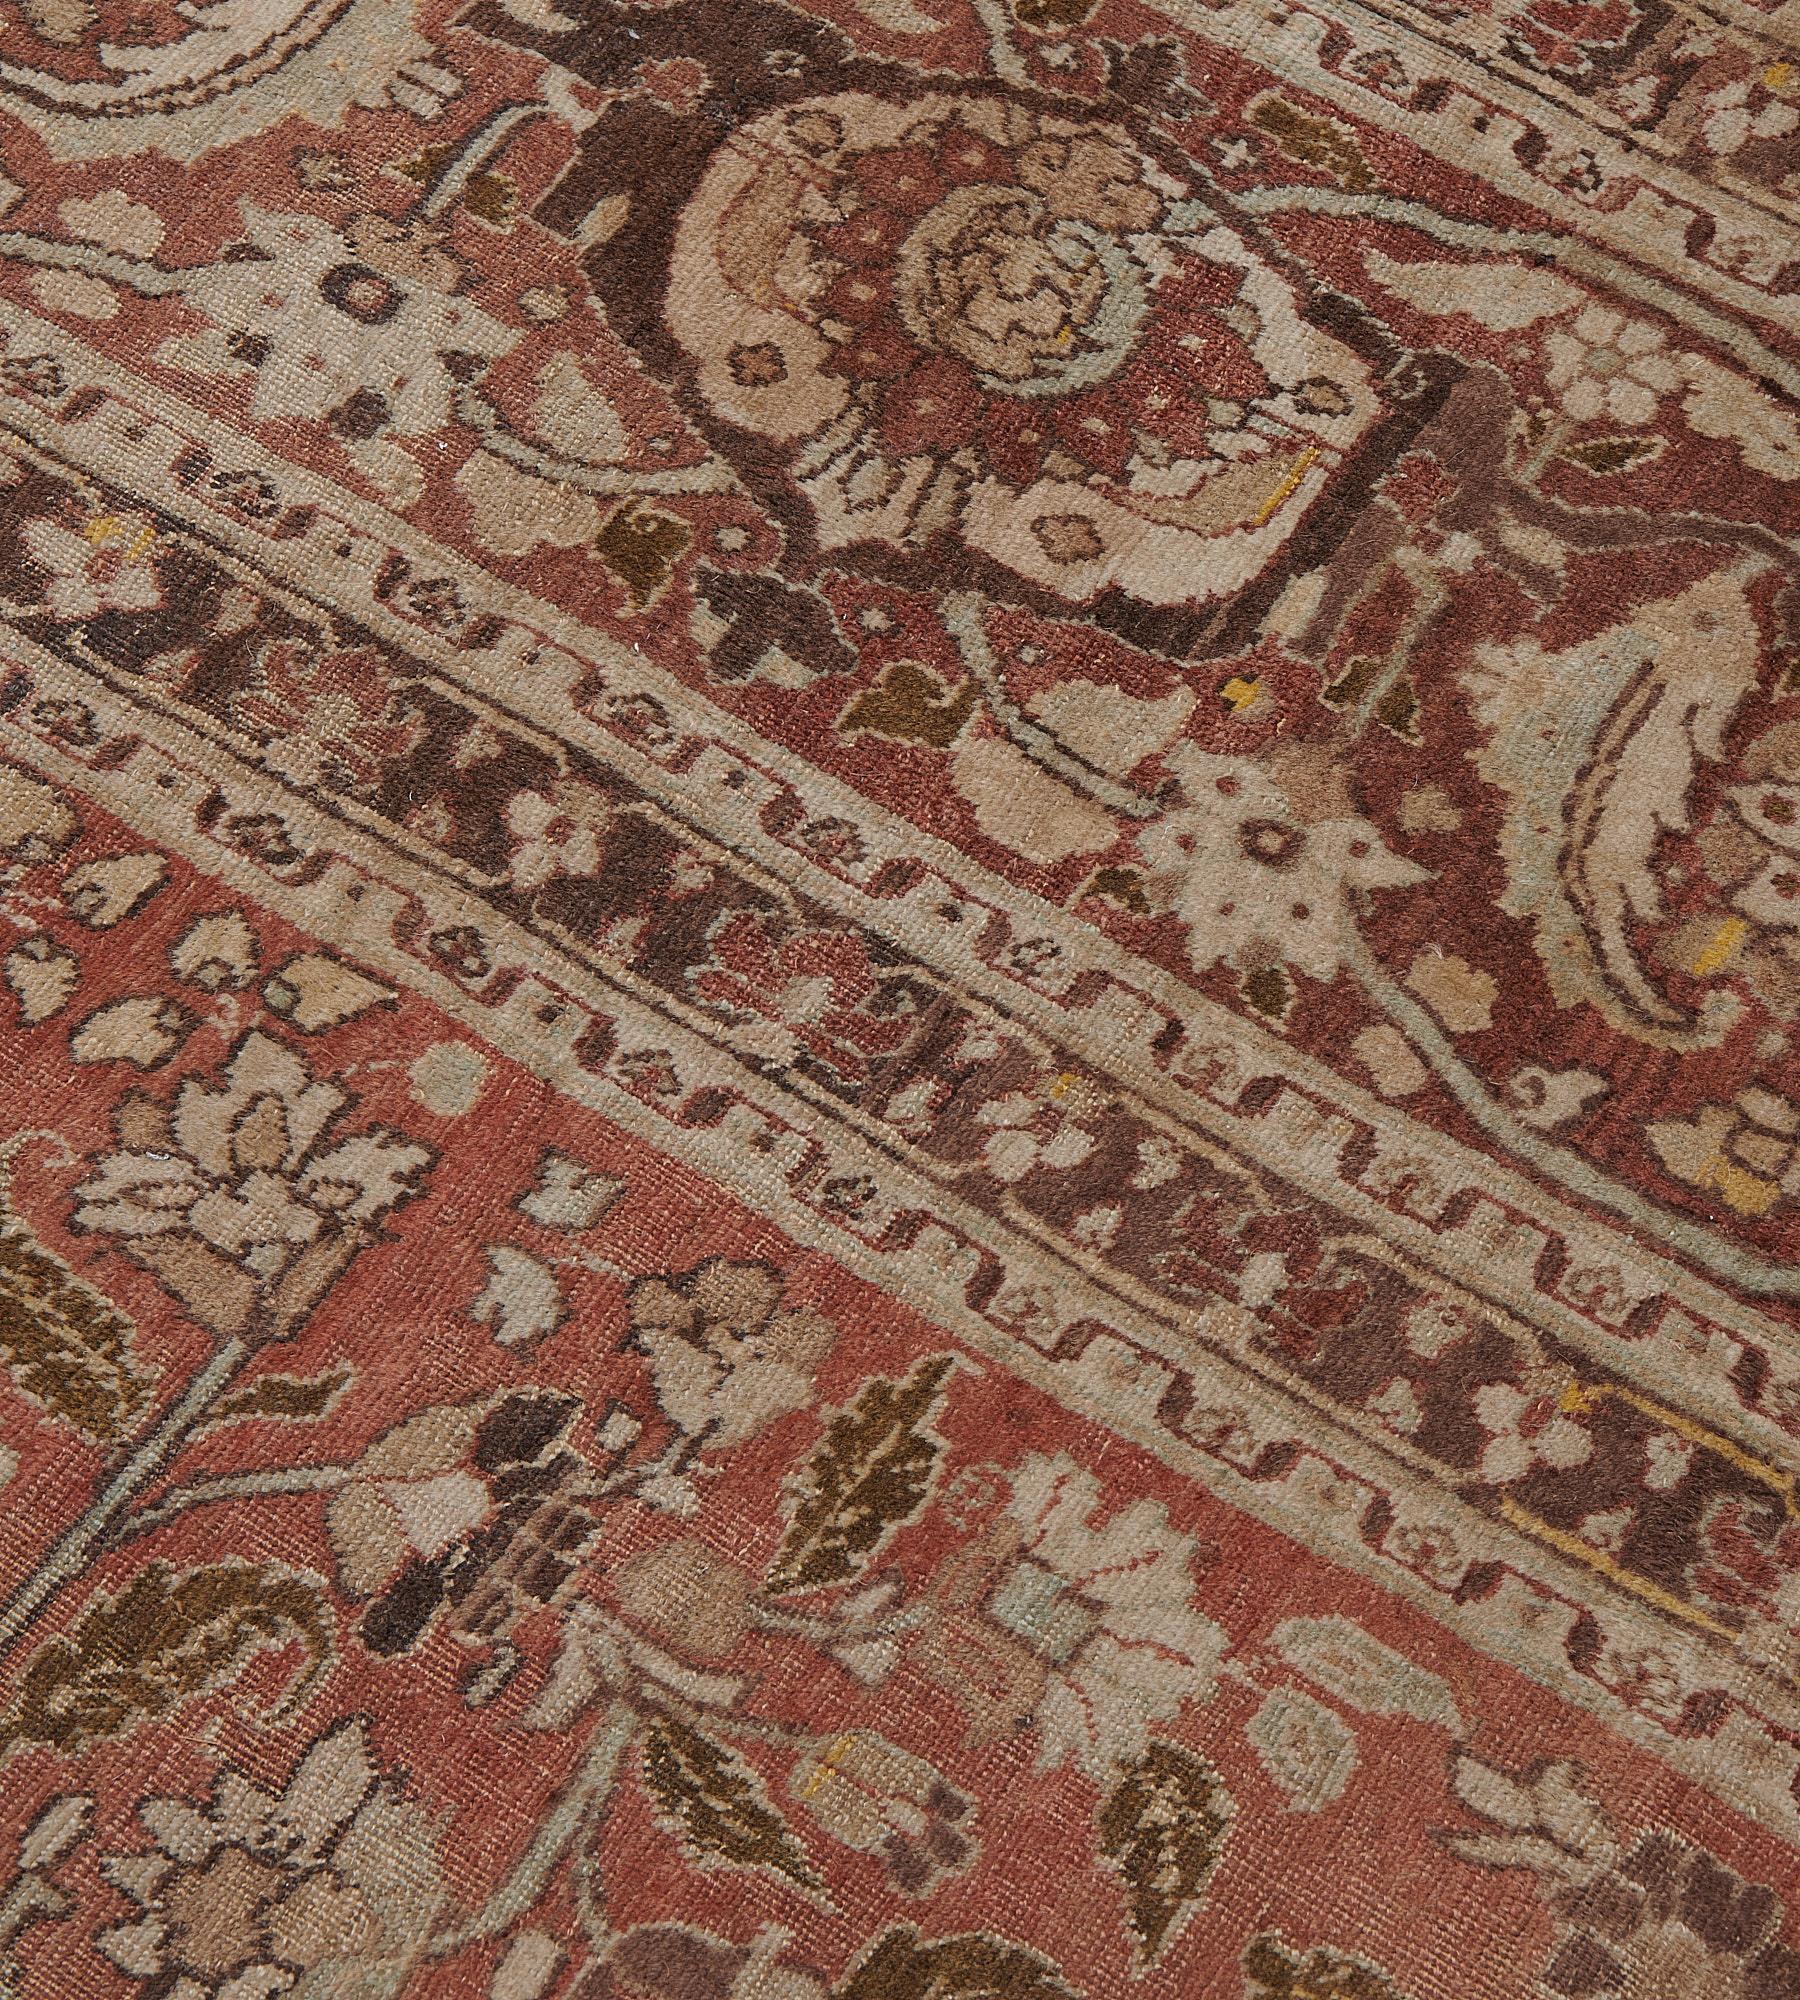 Antique Late 19th Century Handwoven Wool Tabriz Rug In Good Condition For Sale In West Hollywood, CA